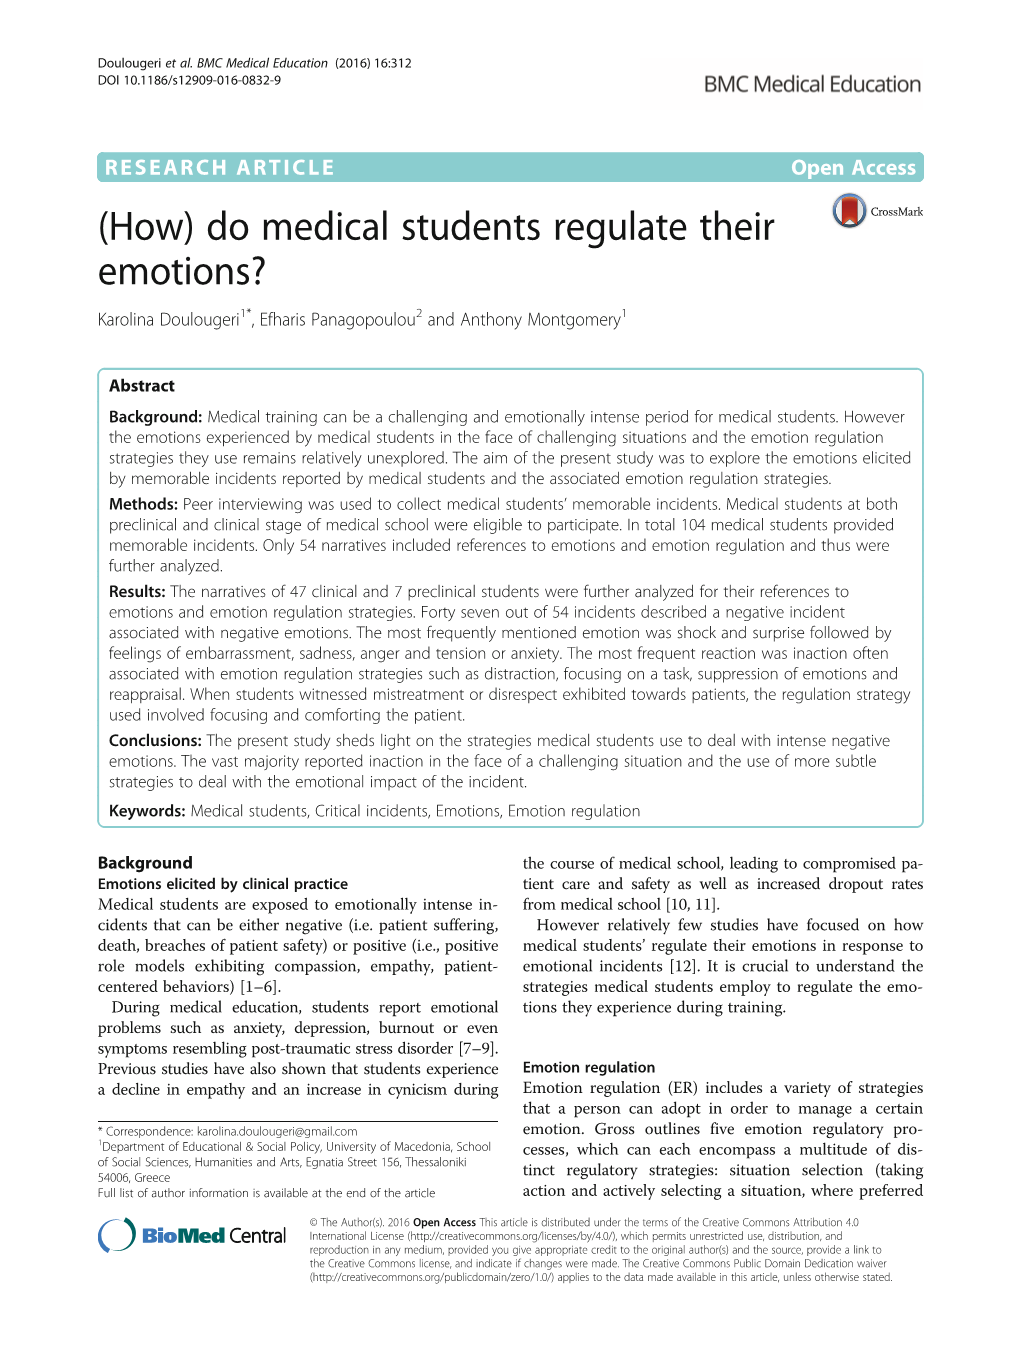 (How) Do Medical Students Regulate Their Emotions? Karolina Doulougeri1*, Efharis Panagopoulou2 and Anthony Montgomery1